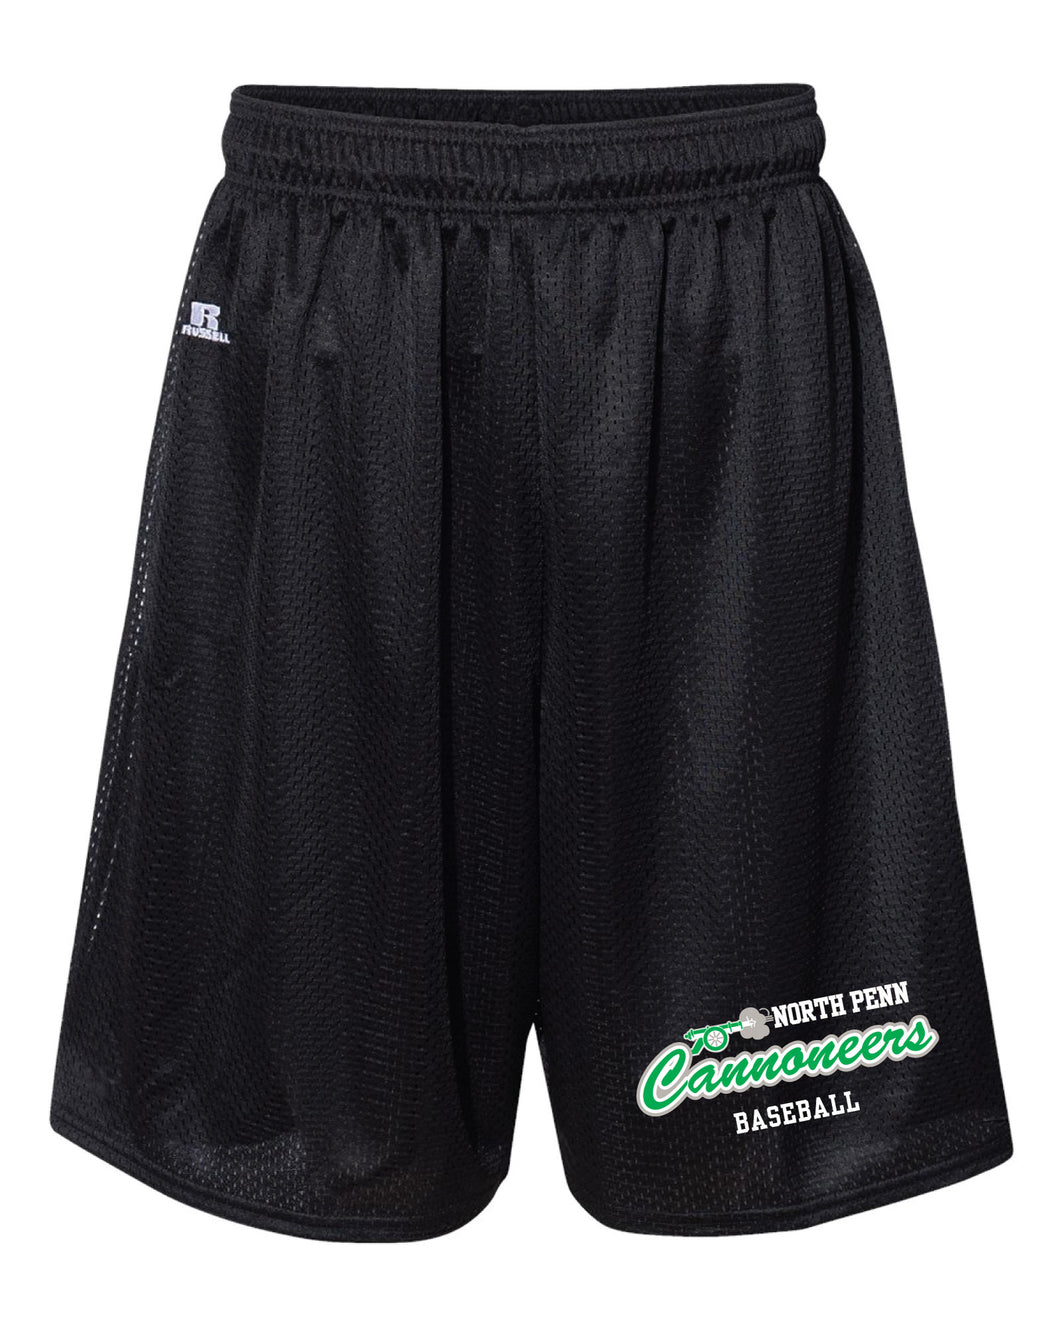 North Penn Cannoneers Baseball Russell Athletic Tech Shorts - Black